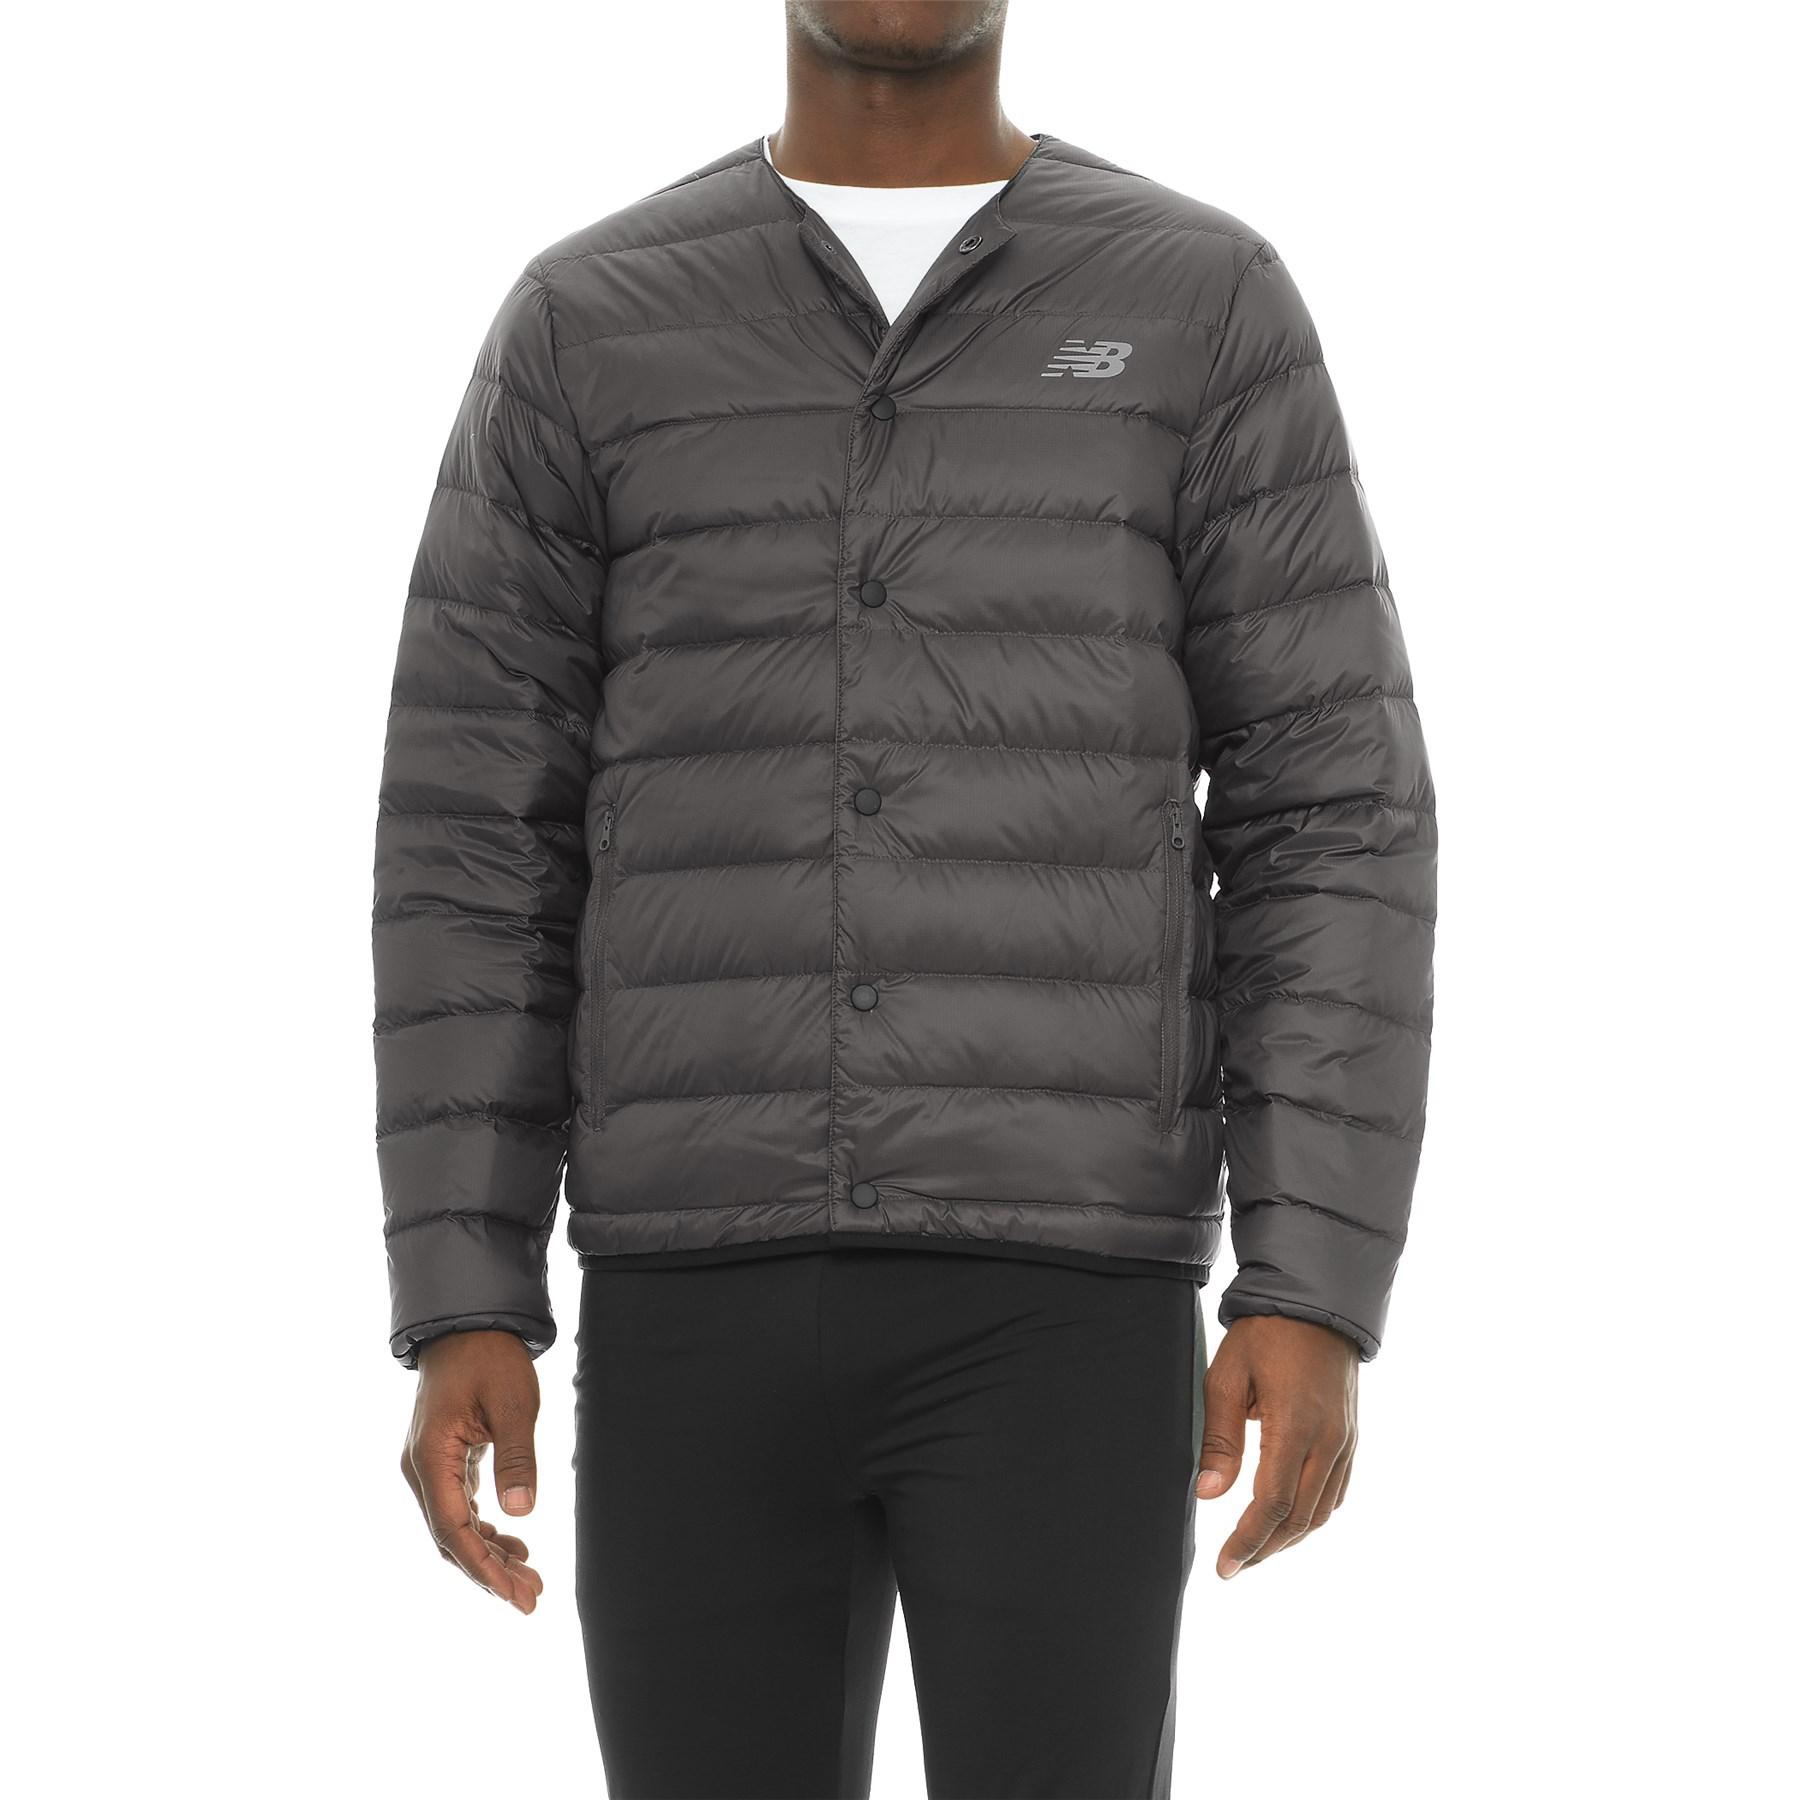 Lyst - New Balance 247 Luxe Snap Down Jacket in Black for Men